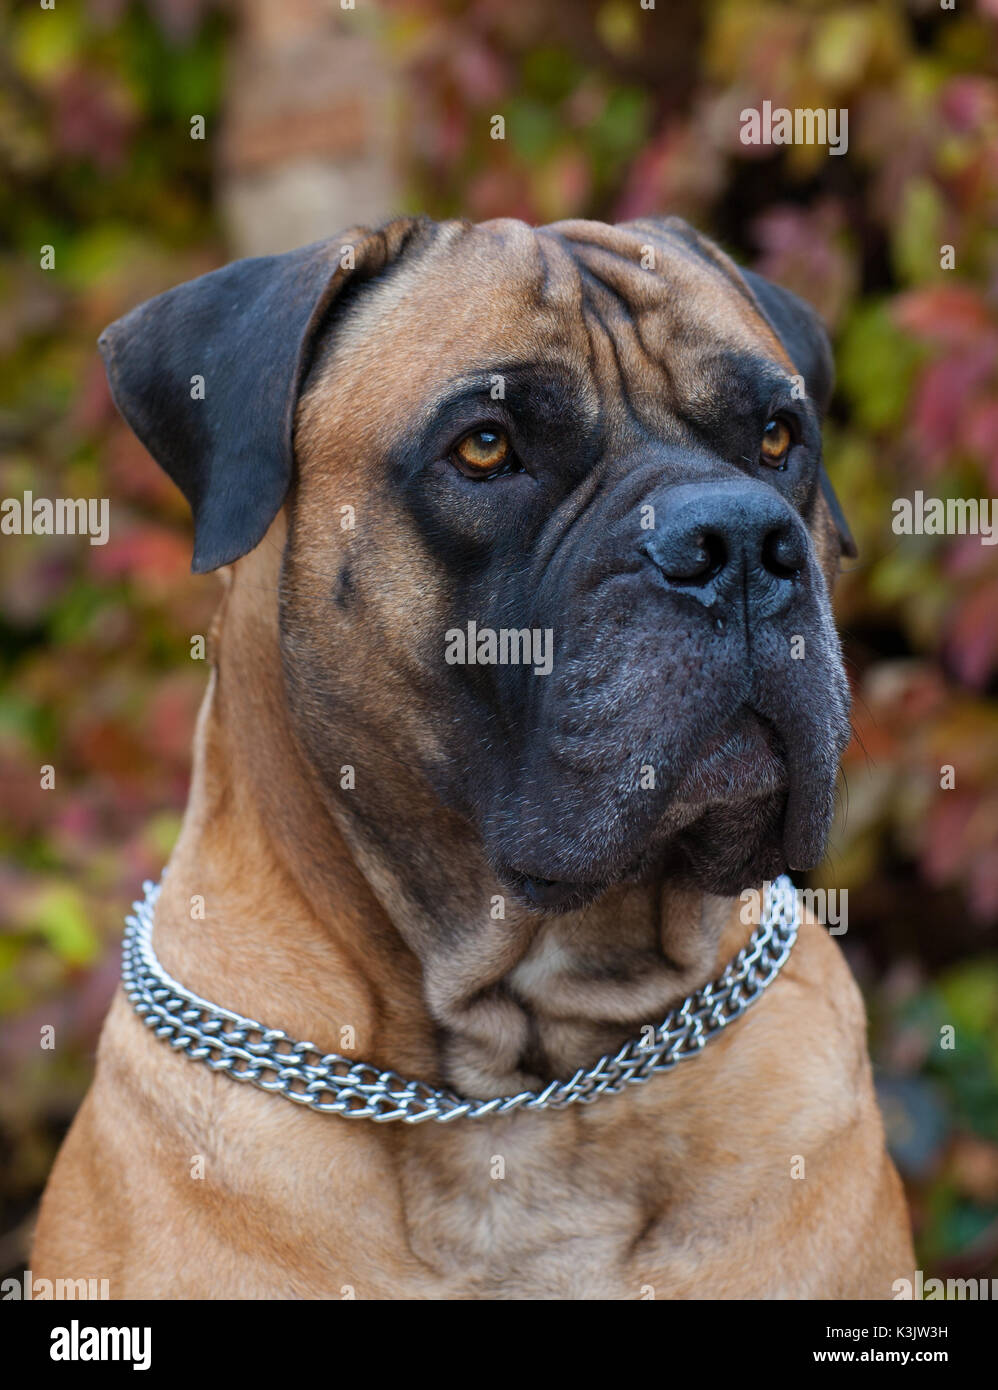 Eyes amber-colored.  Closeup portrait of rare breed of dog South African Boerboel on the background of autumn grape leaves. South African Mastiff. Stock Photo